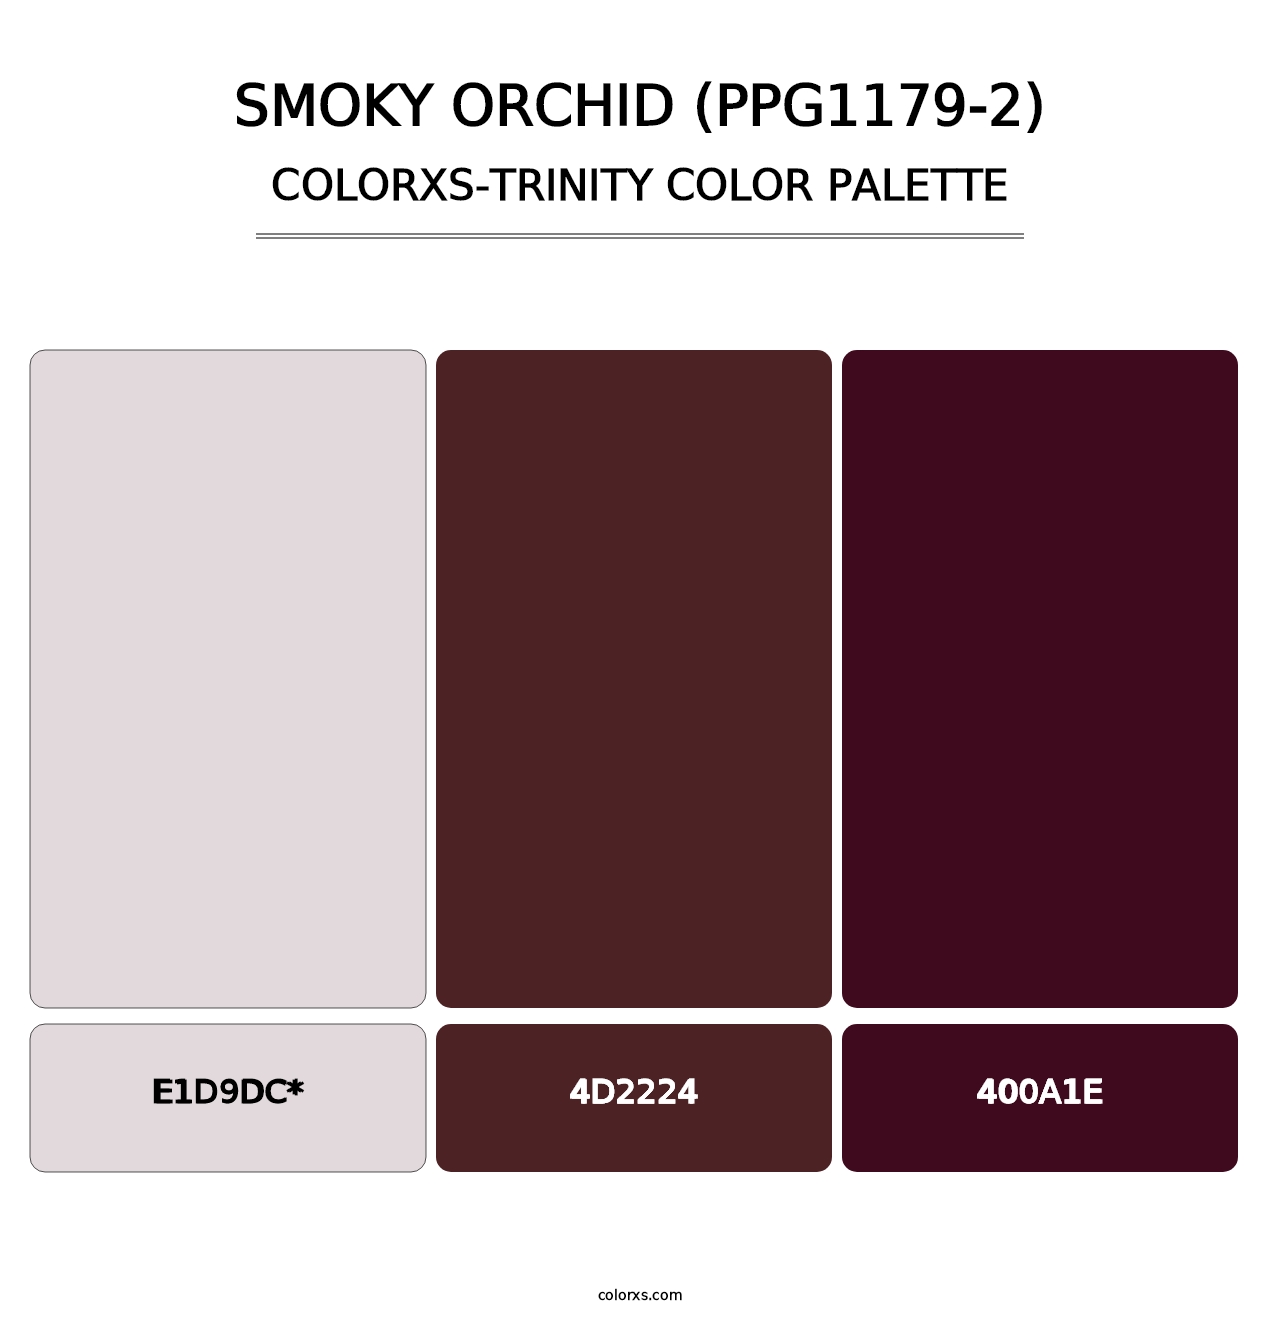 Smoky Orchid (PPG1179-2) - Colorxs Trinity Palette